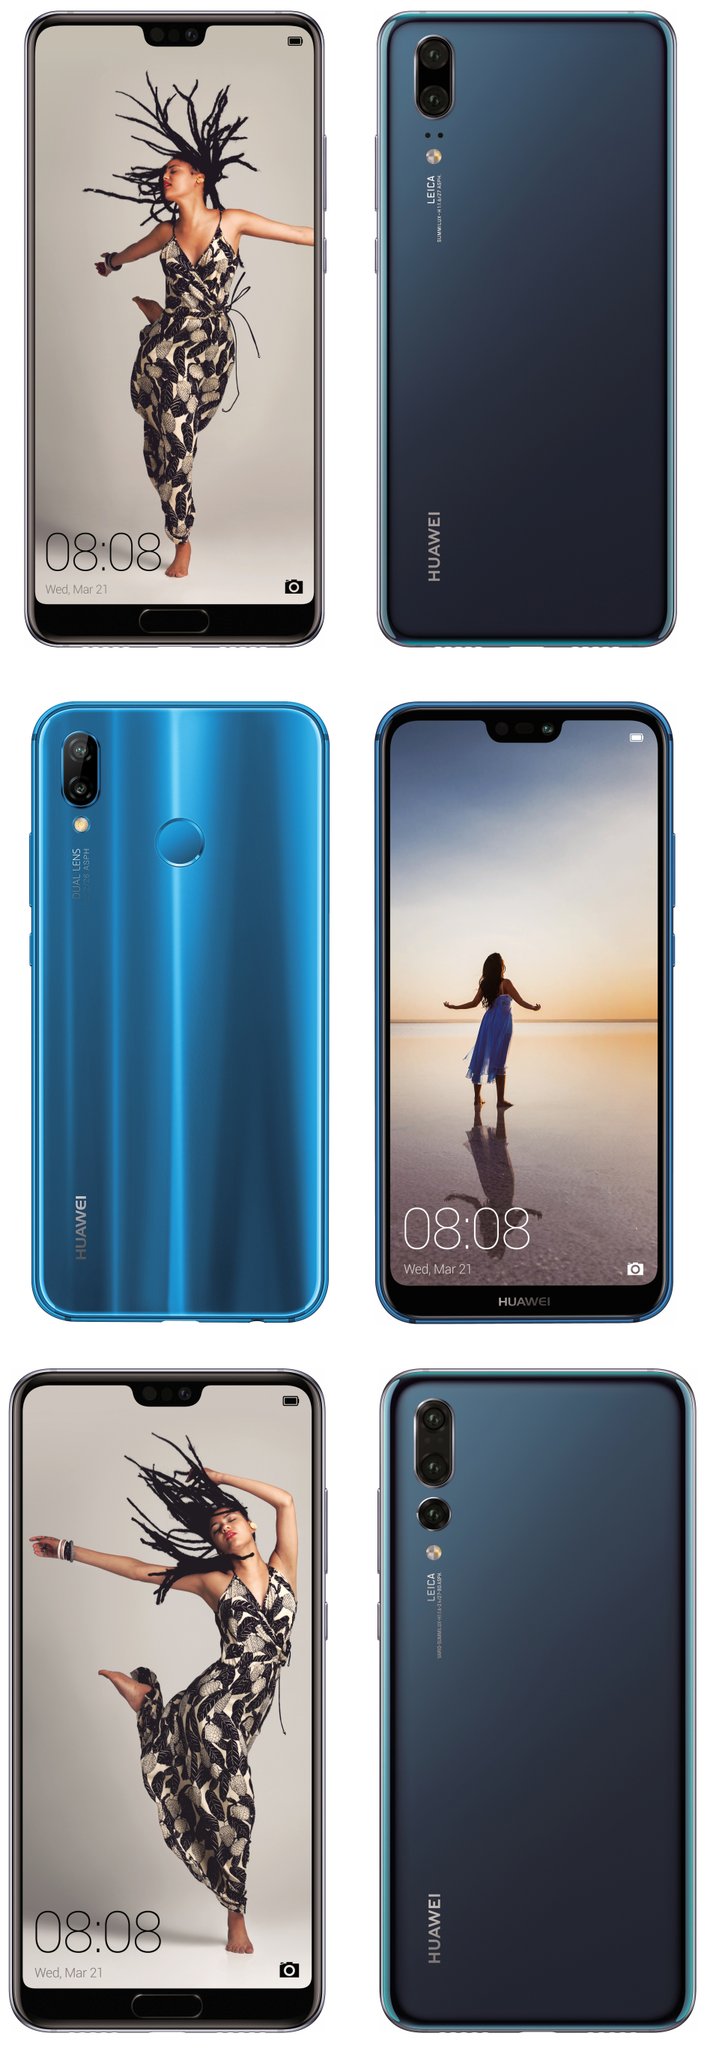 Huawei P20 top, P20 Lite middle and P20 Pro bottom. (Source: Evan Blass)